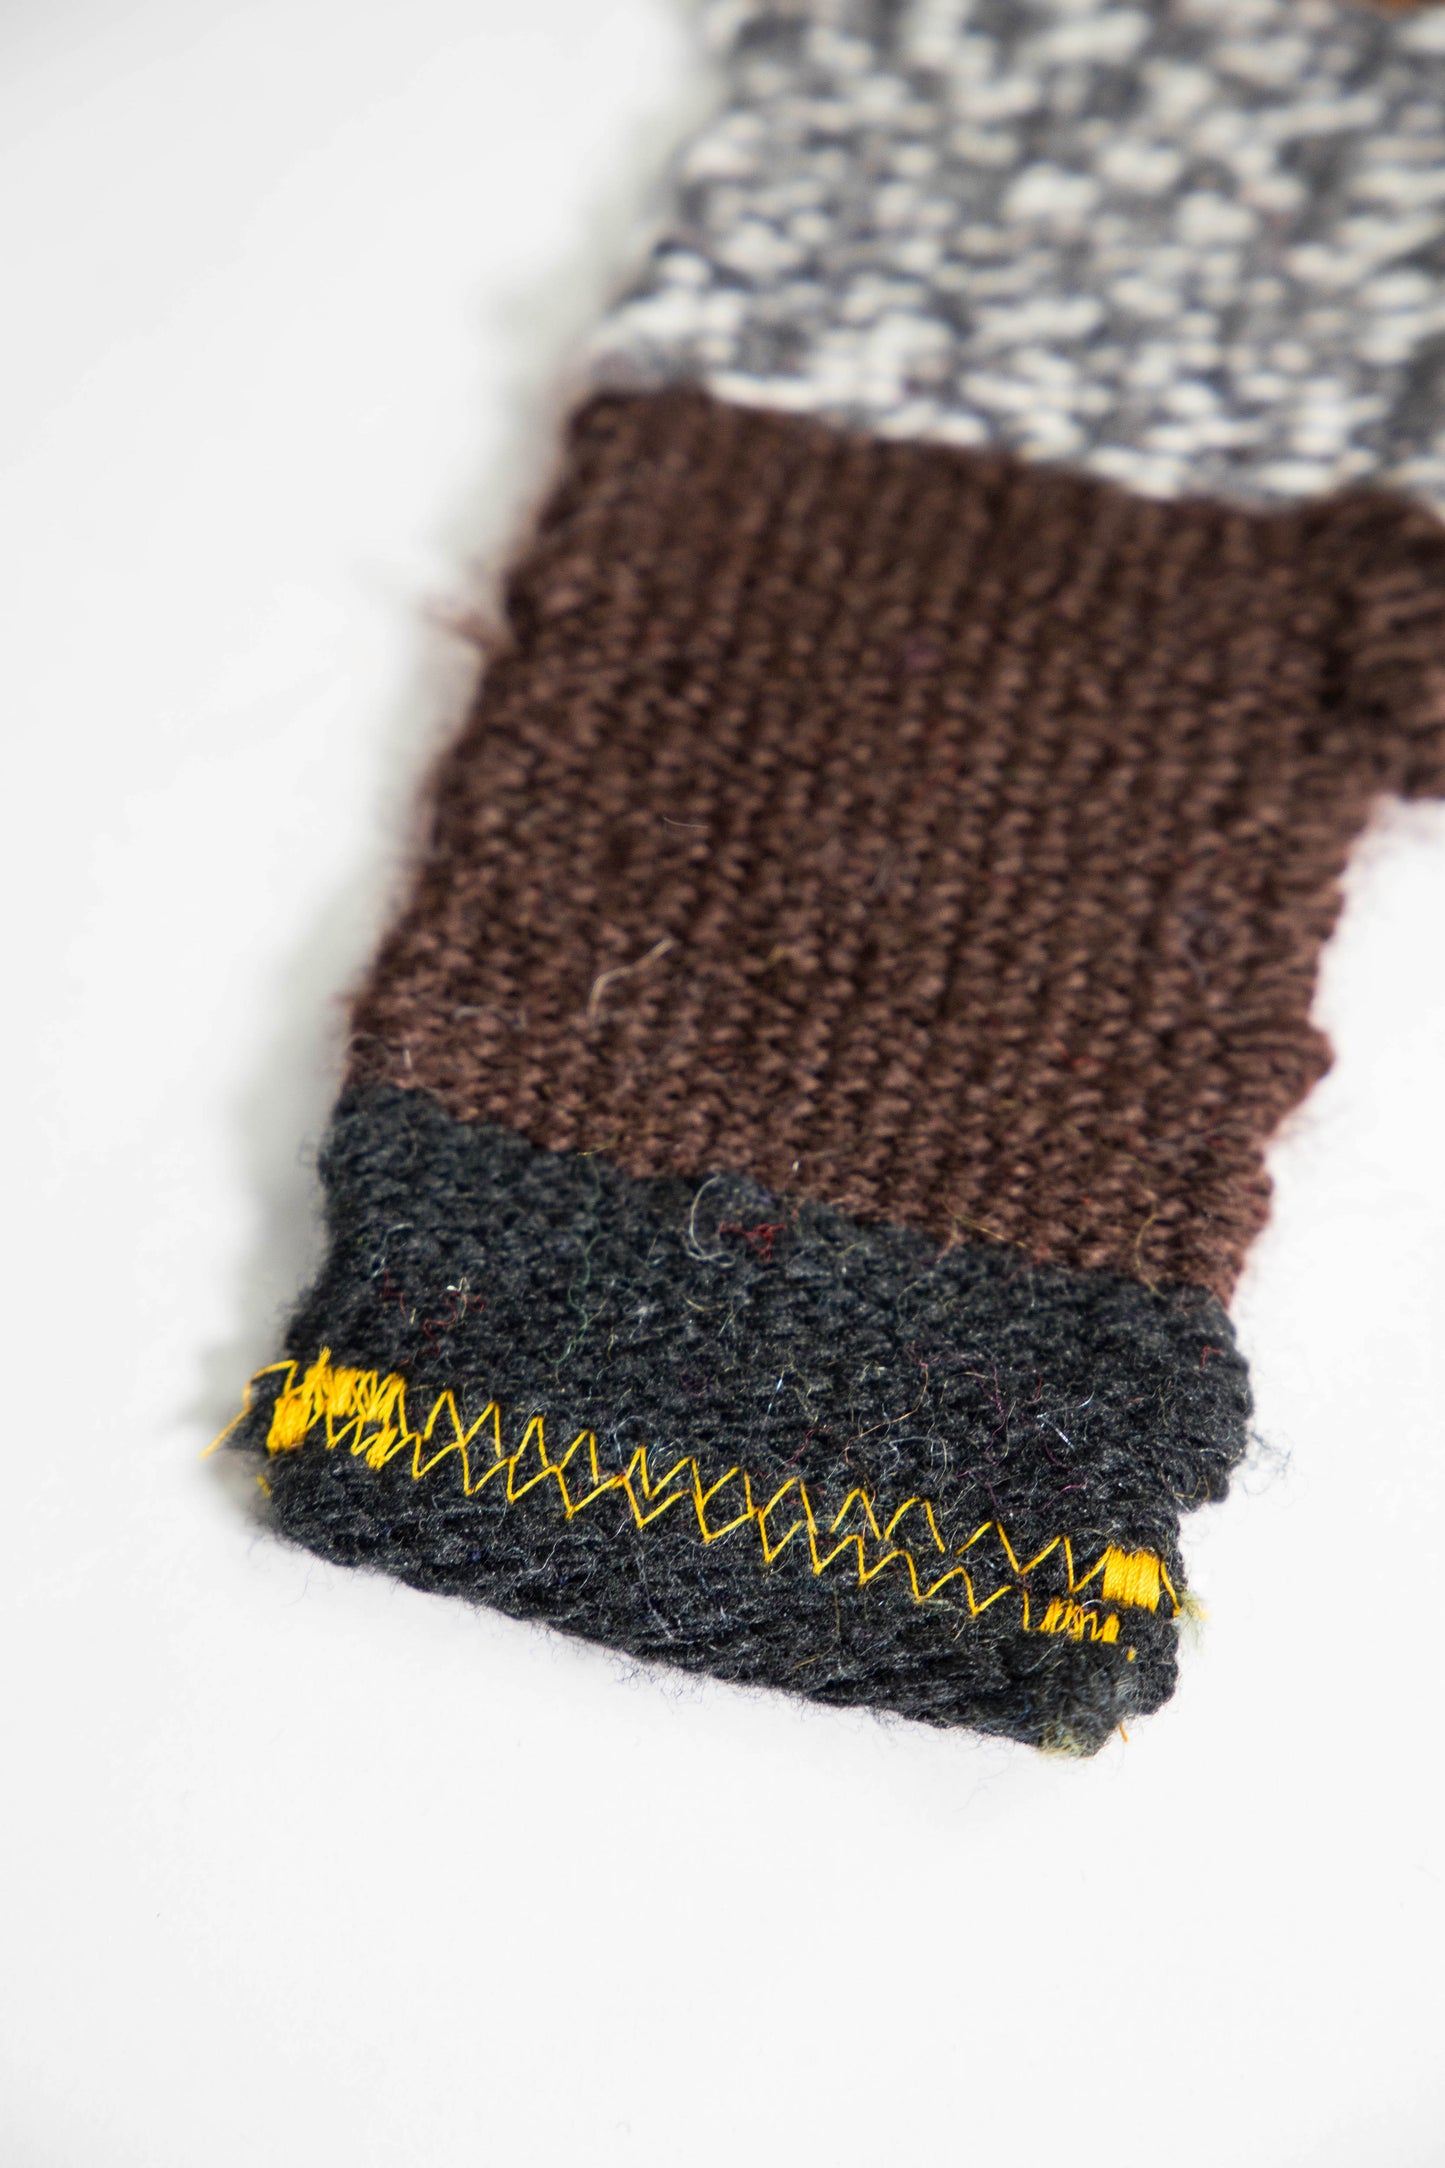 Woven Bookmarks